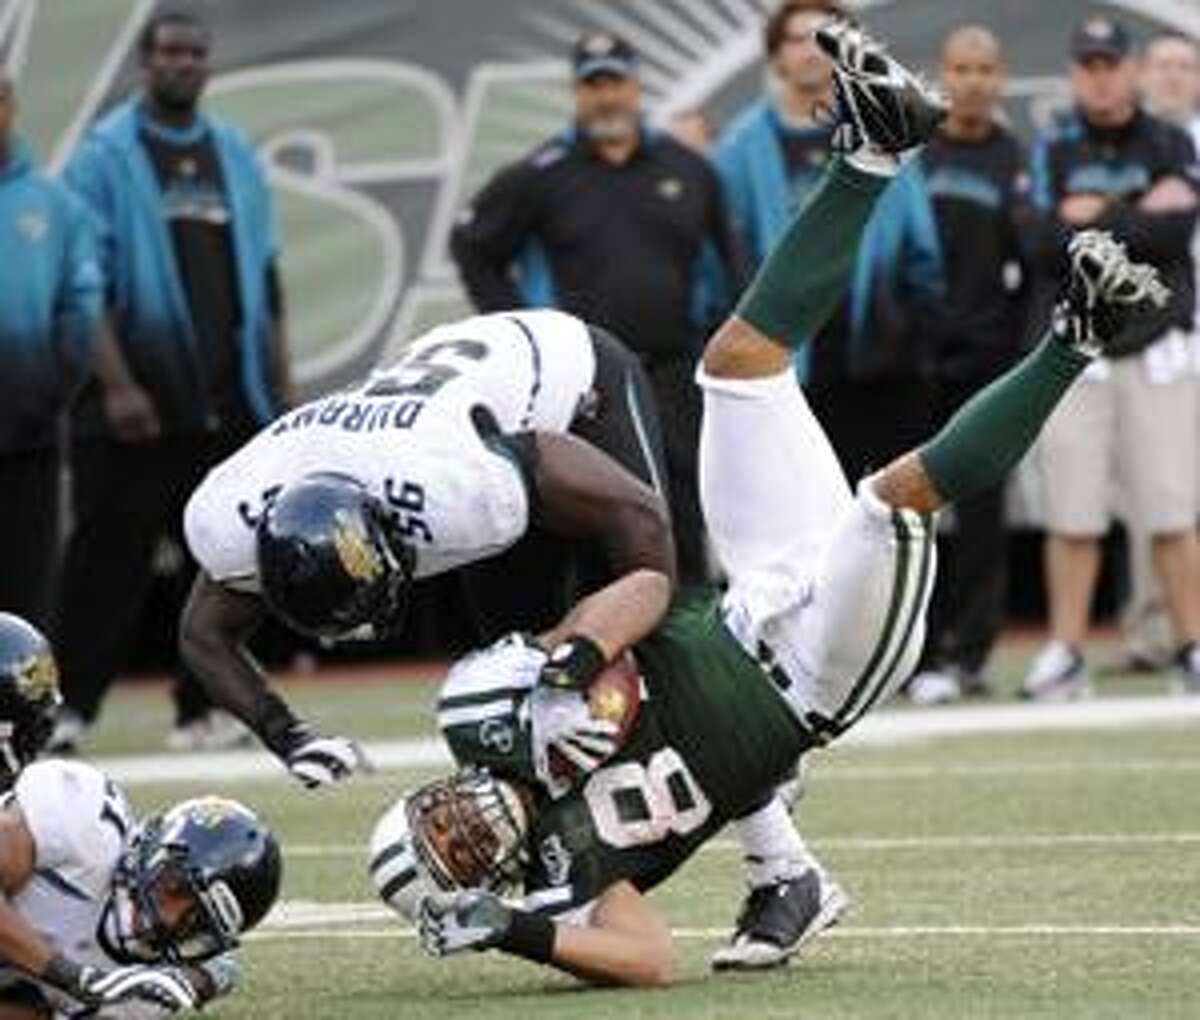 New York Jets tight end Dustin Keller (81) is tackled by Jacksonville Jaguars linebacker Justin Durant (56) during the third quarter Sunday in East Rutherford, N.J.